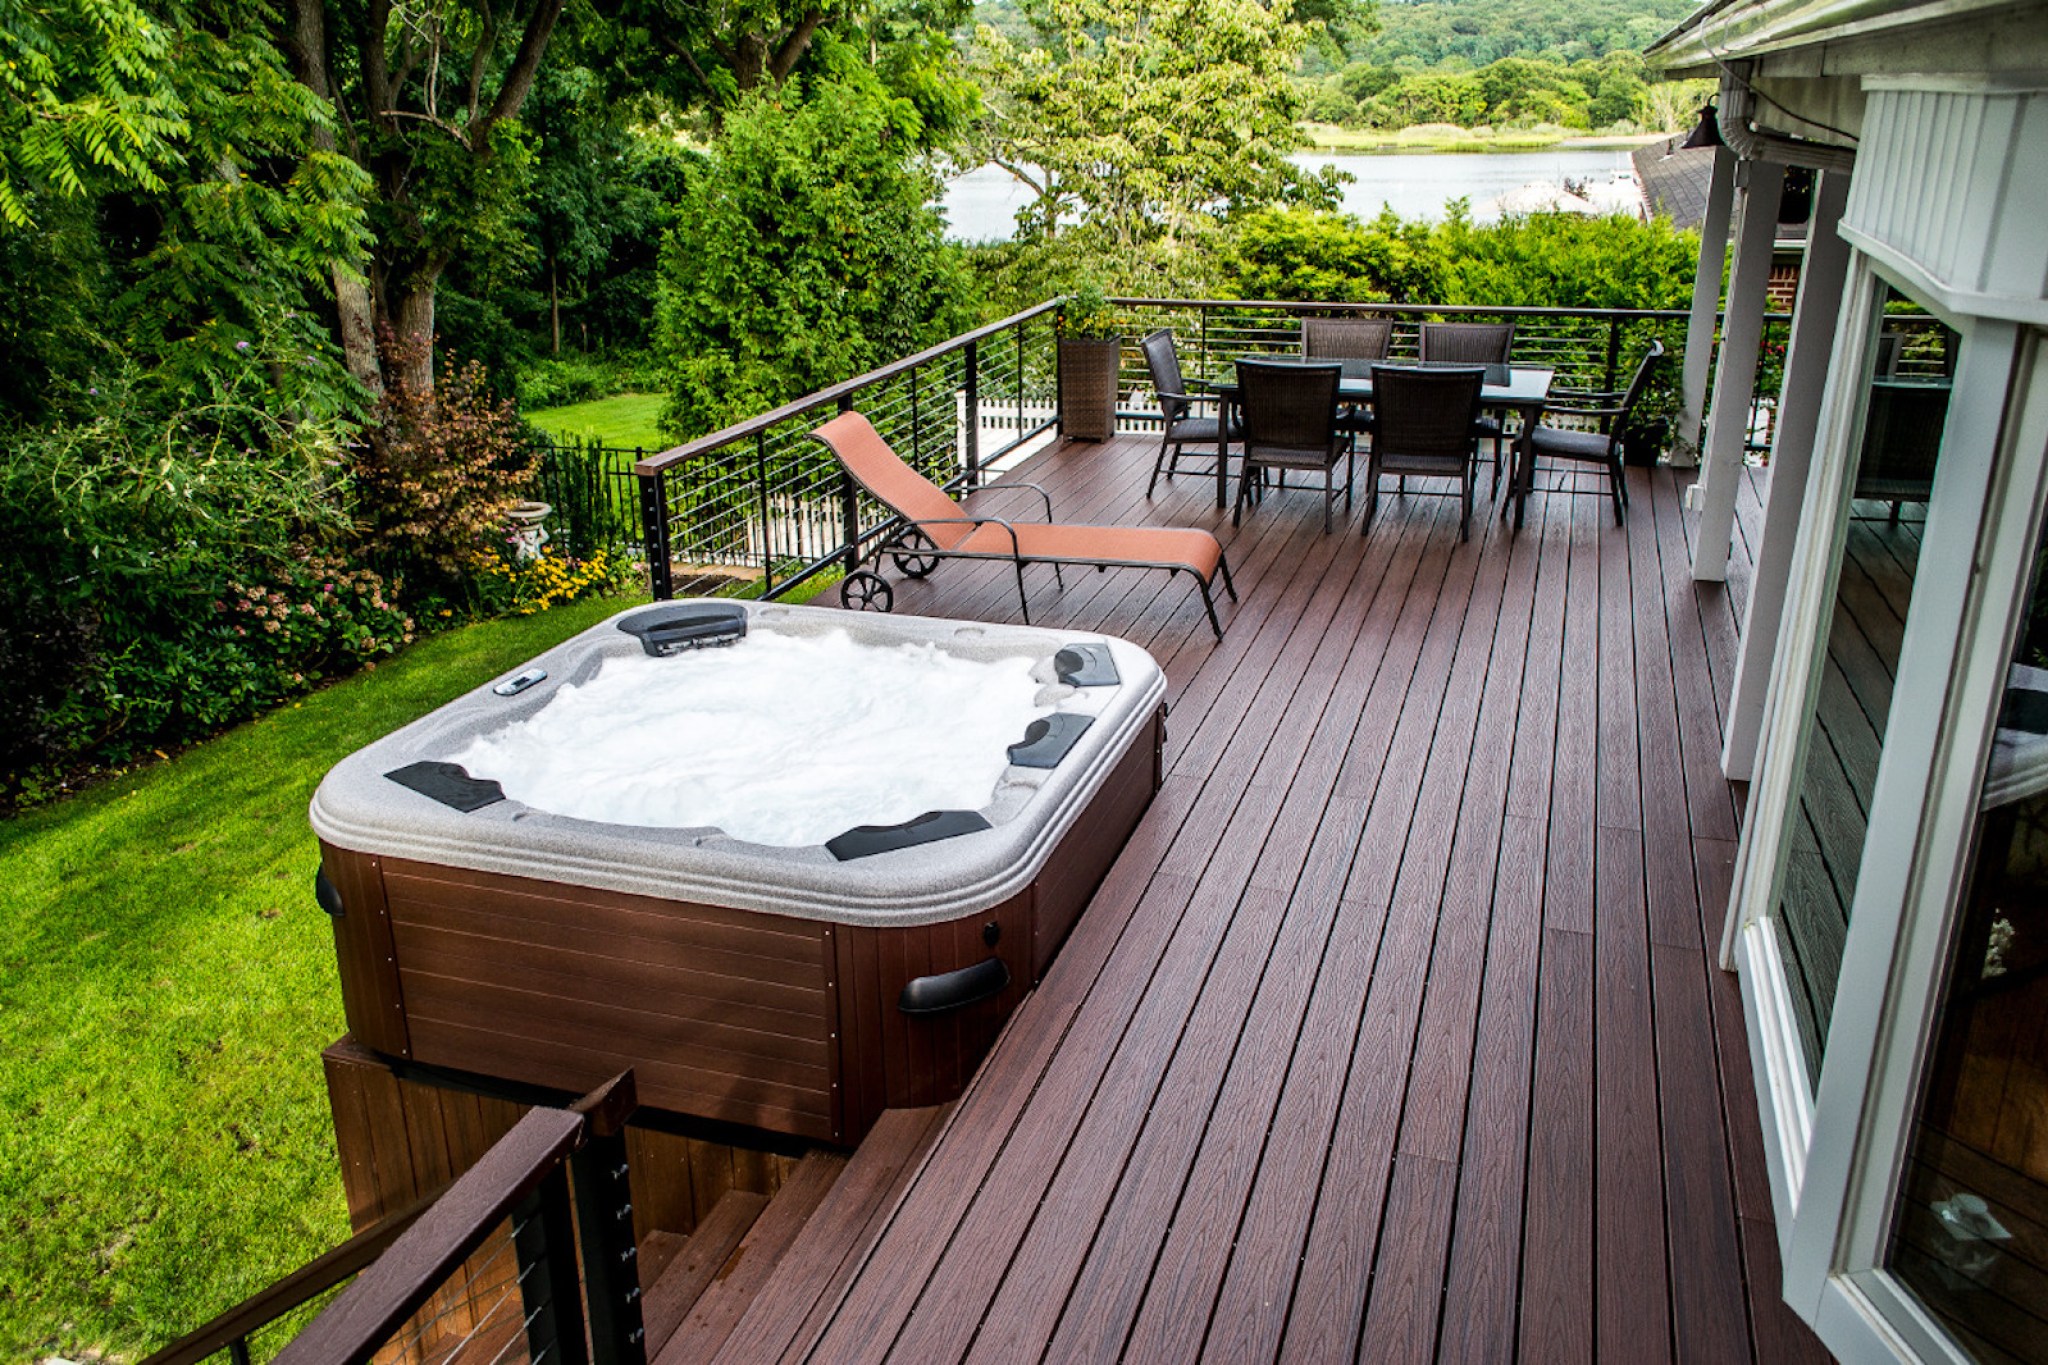 Wood deck with hot tub overlooking lush green area